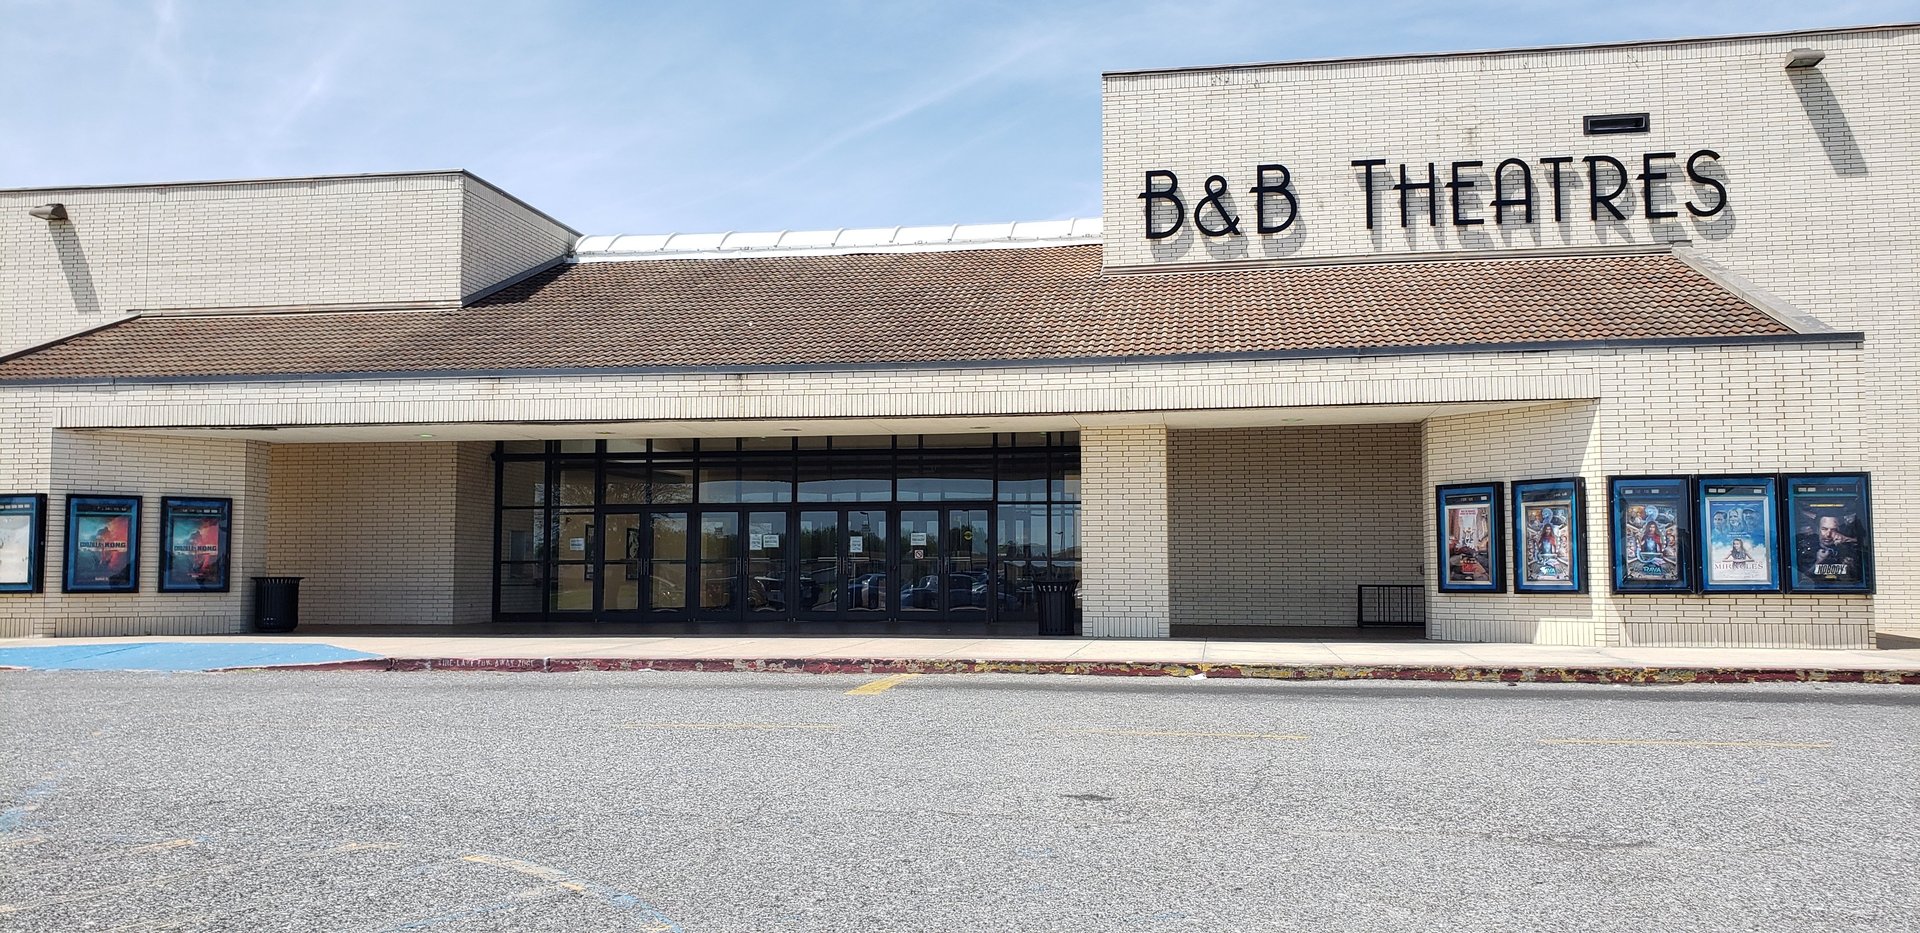 exterior of theatre showing B&B Theaters sign